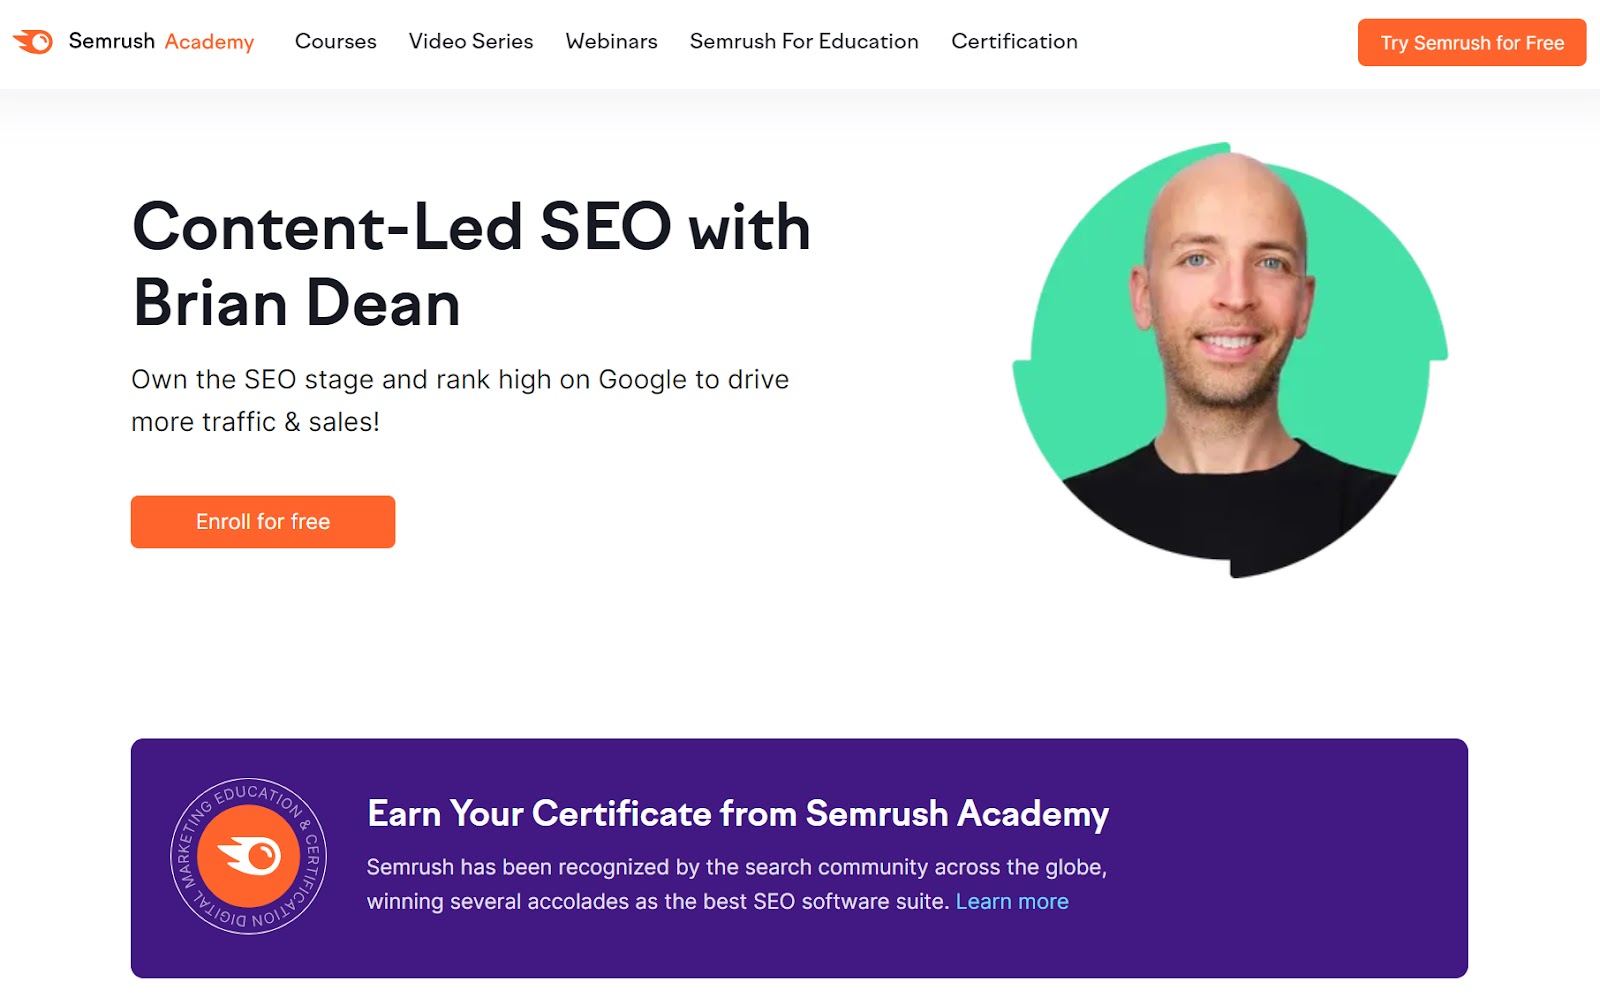 Content-Led SEO with Brian Dean landing page